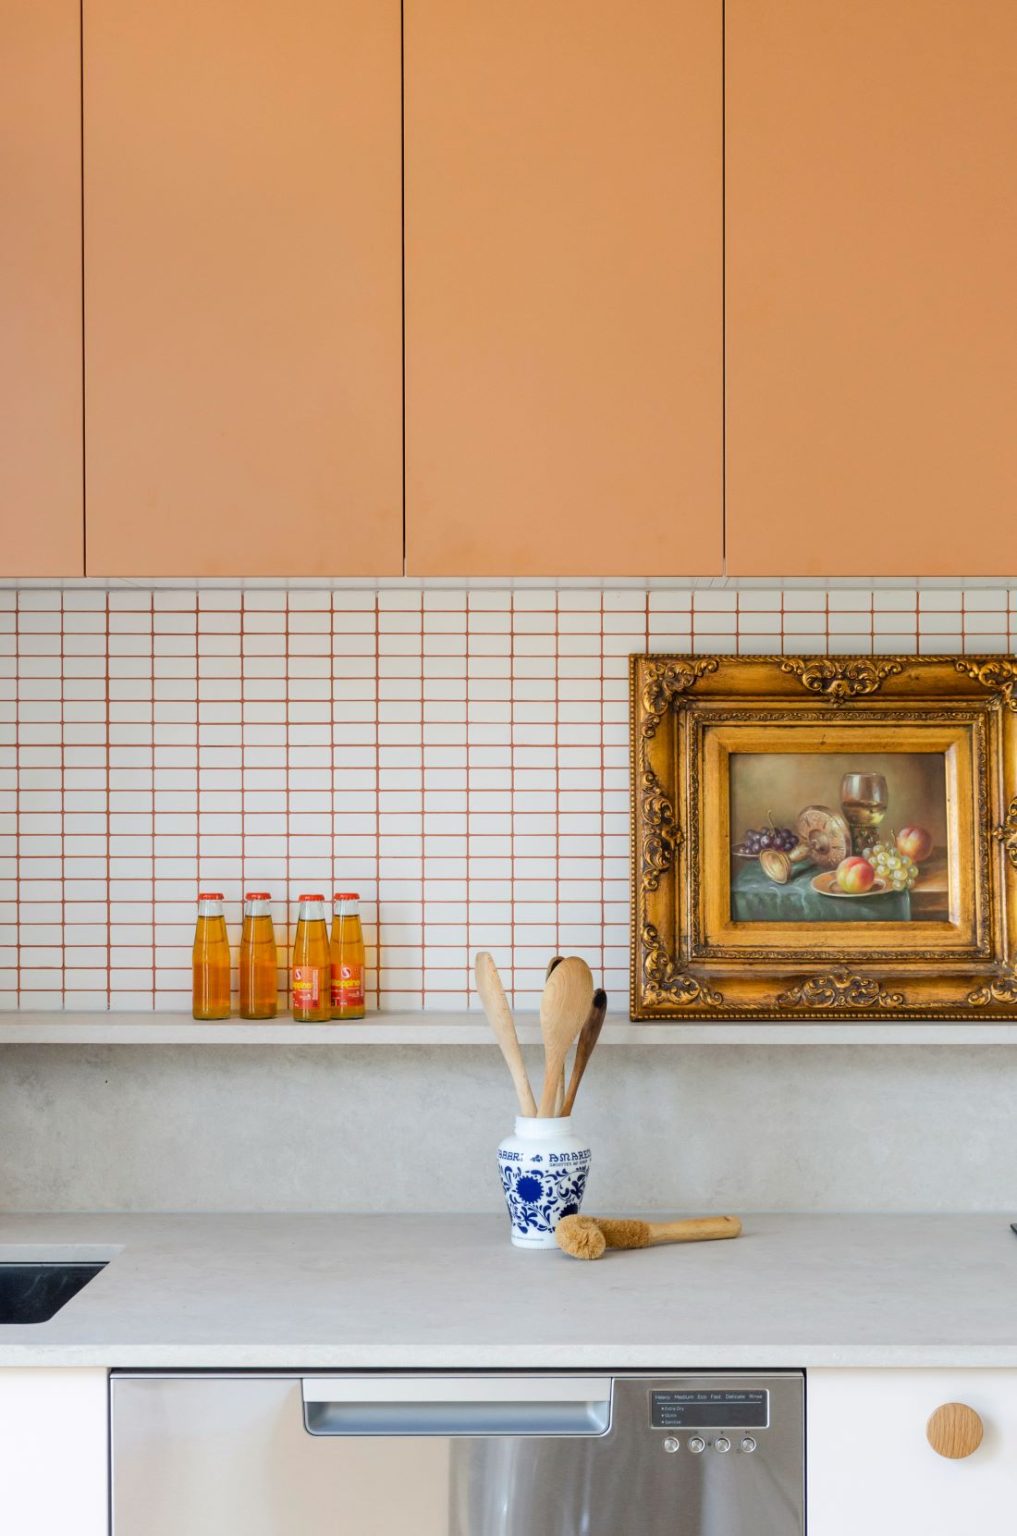 Evergreen: The orange kitchen with coloured joinery and grout